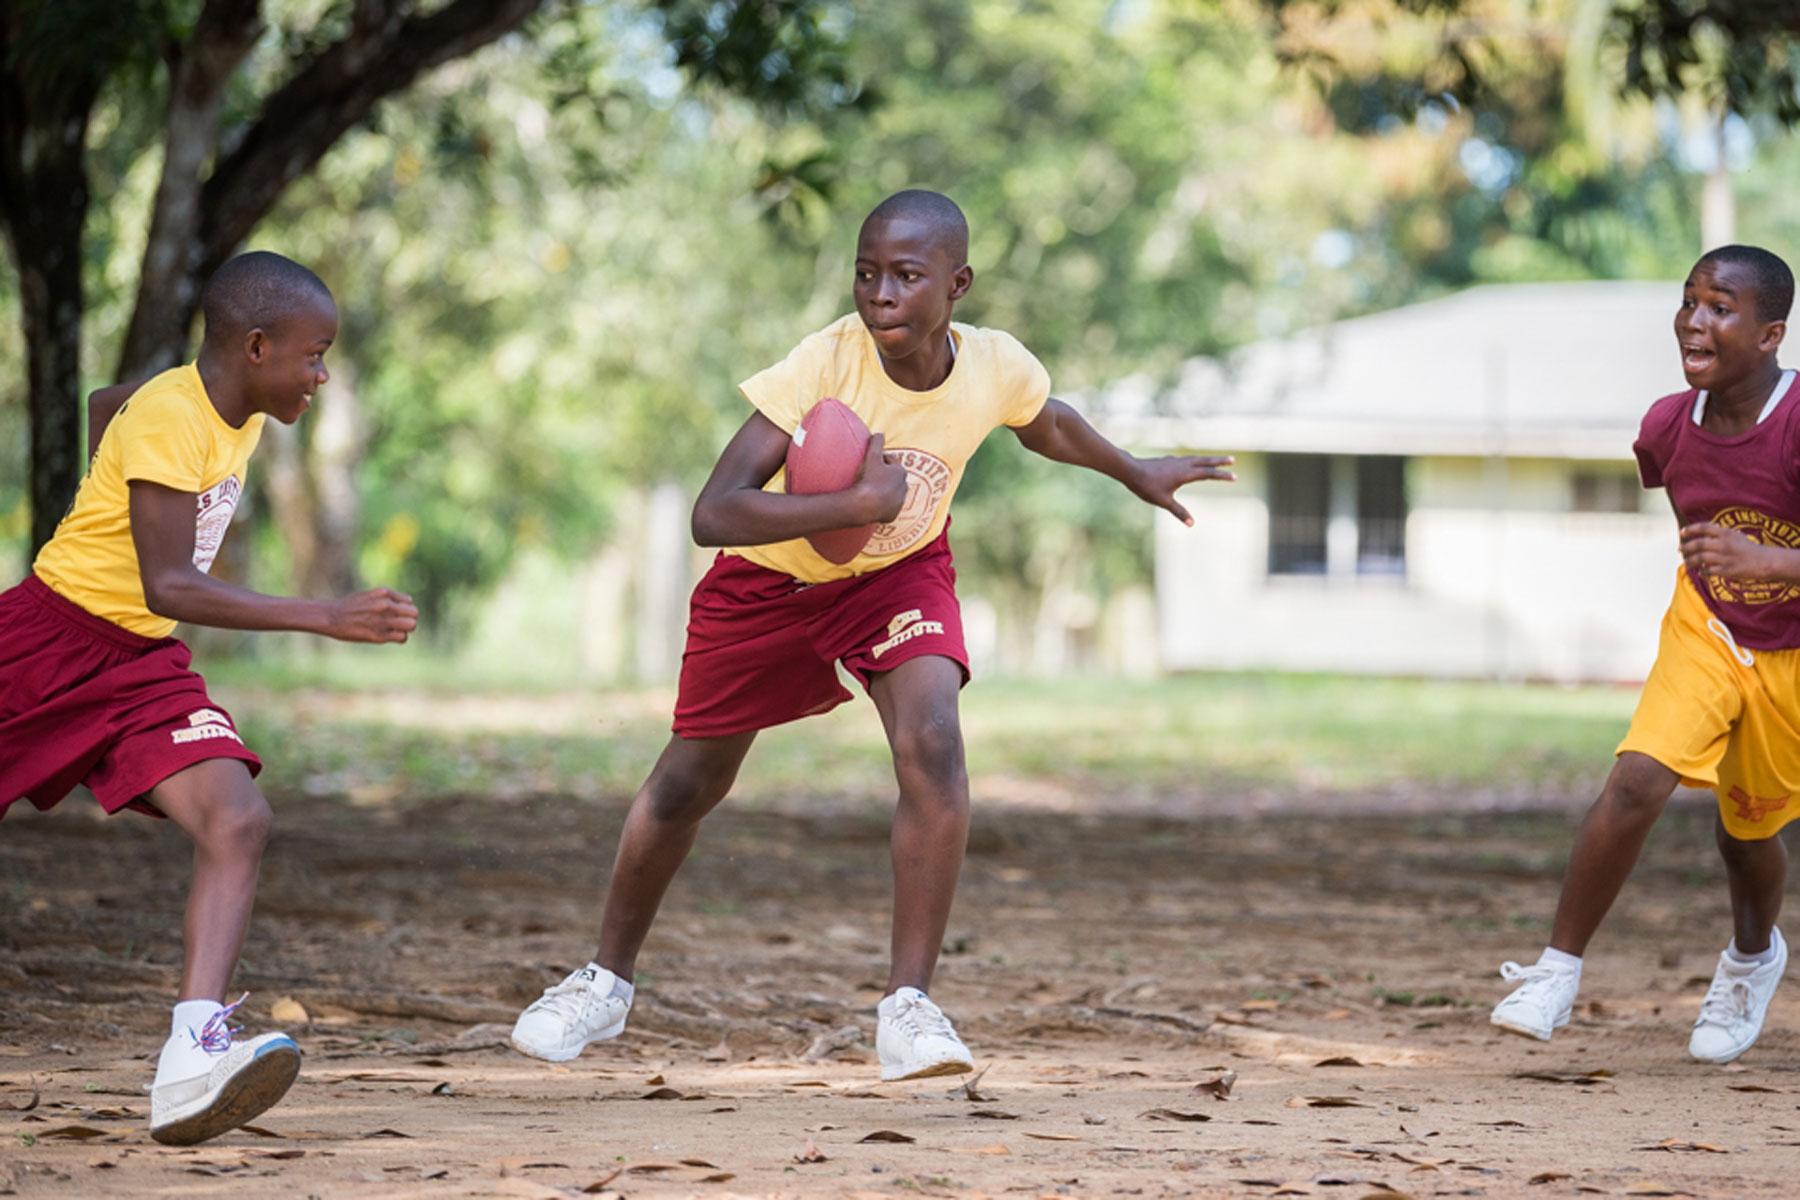 A group of students at Ricks Institute play football in the schoolyard. All photos: LWF/Albin Hillert